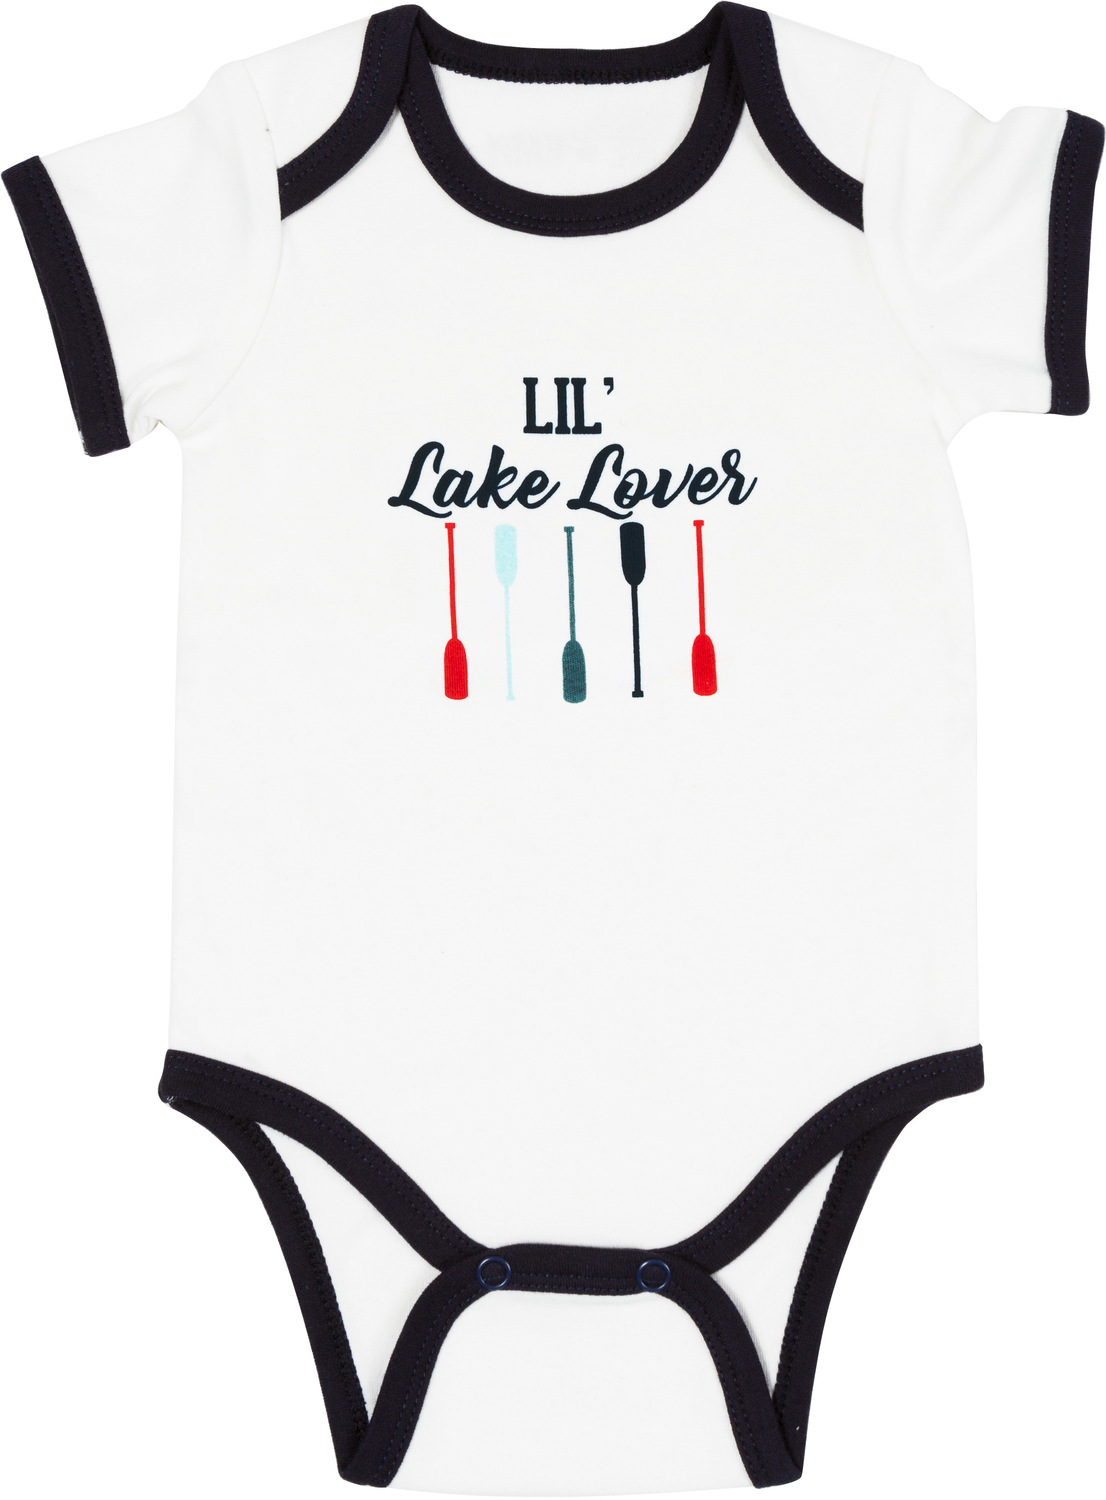 Lake Lover by We Baby - Lake Lover - 6-12 Months
Blue Trimmed Bodysuit